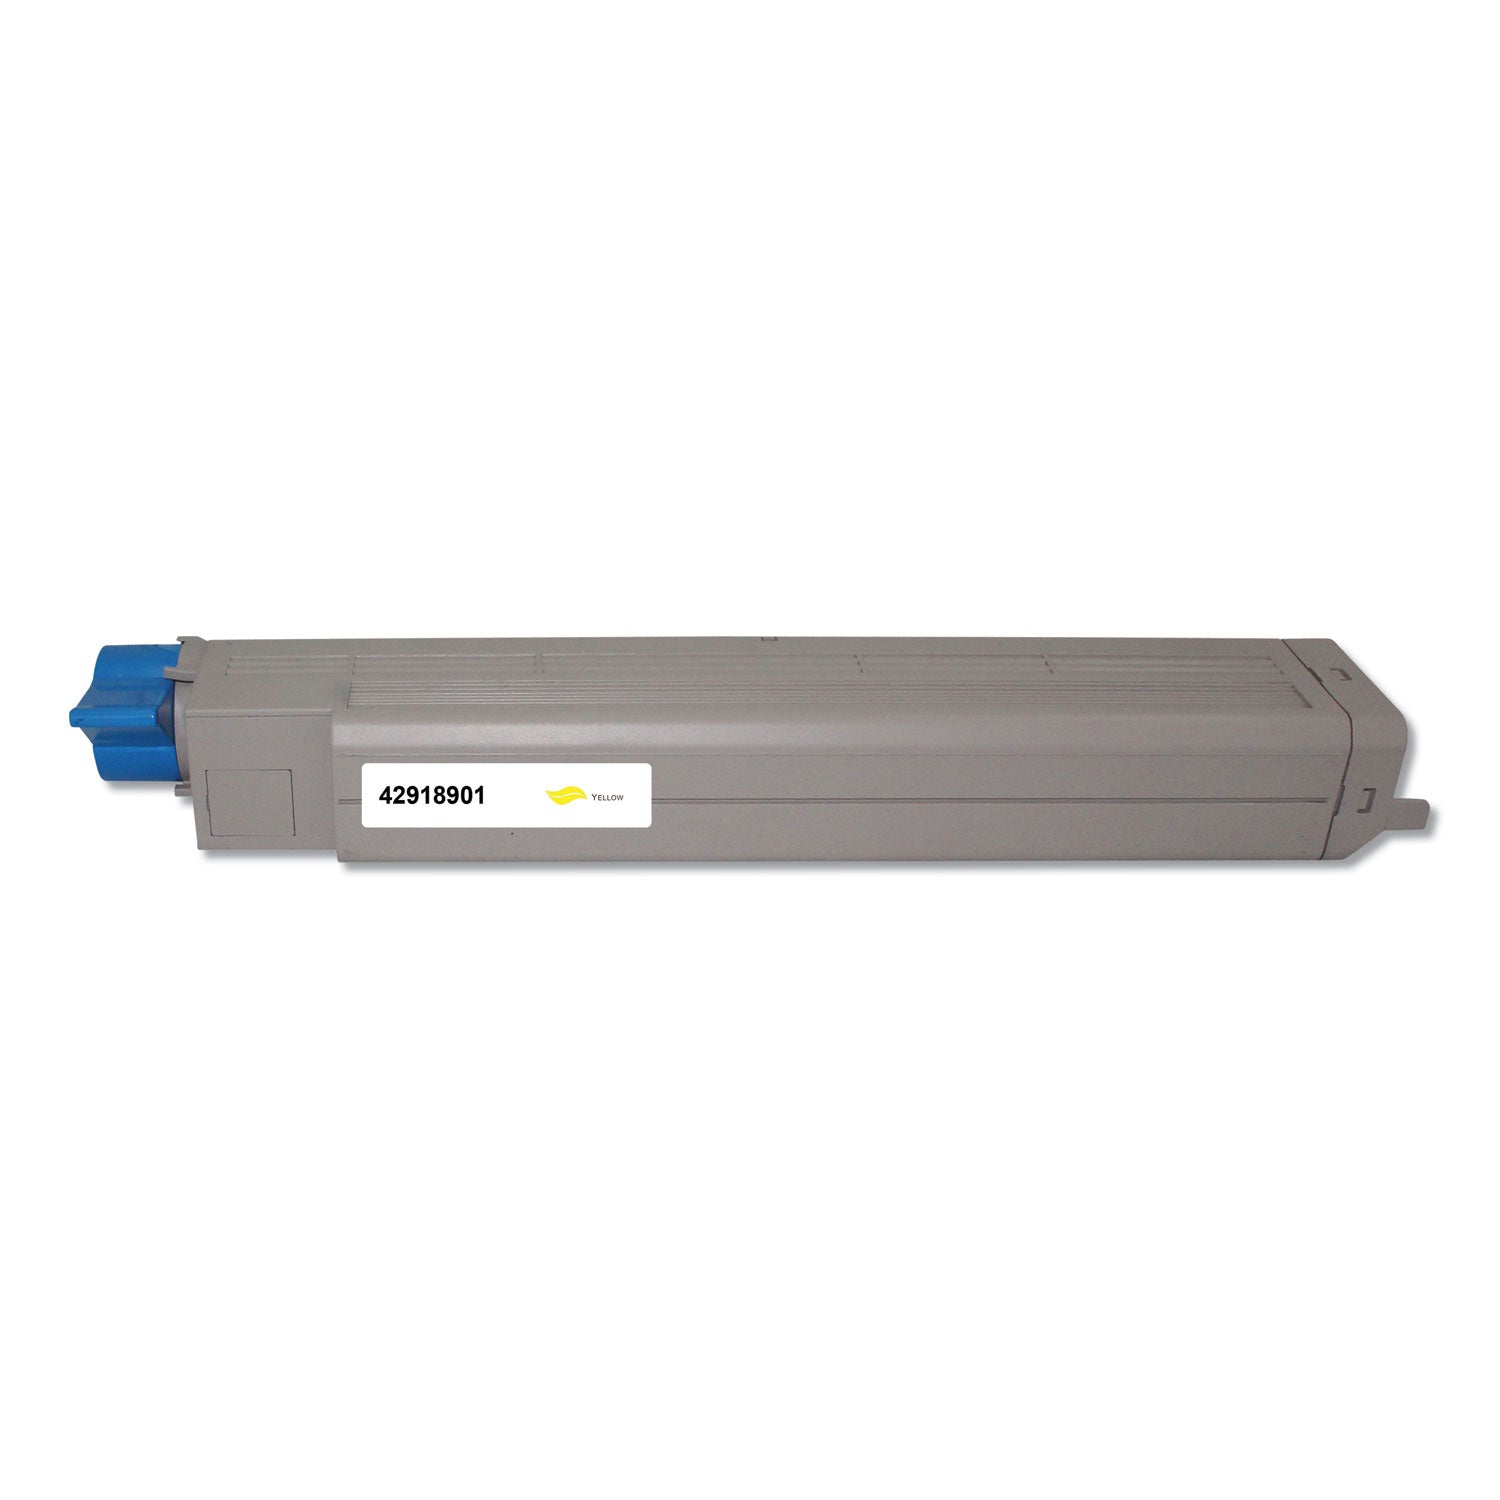 remanufactured-yellow-toner-type-c7-replacement-for-42918901-15000-page-yield_ivr42918901 - 2